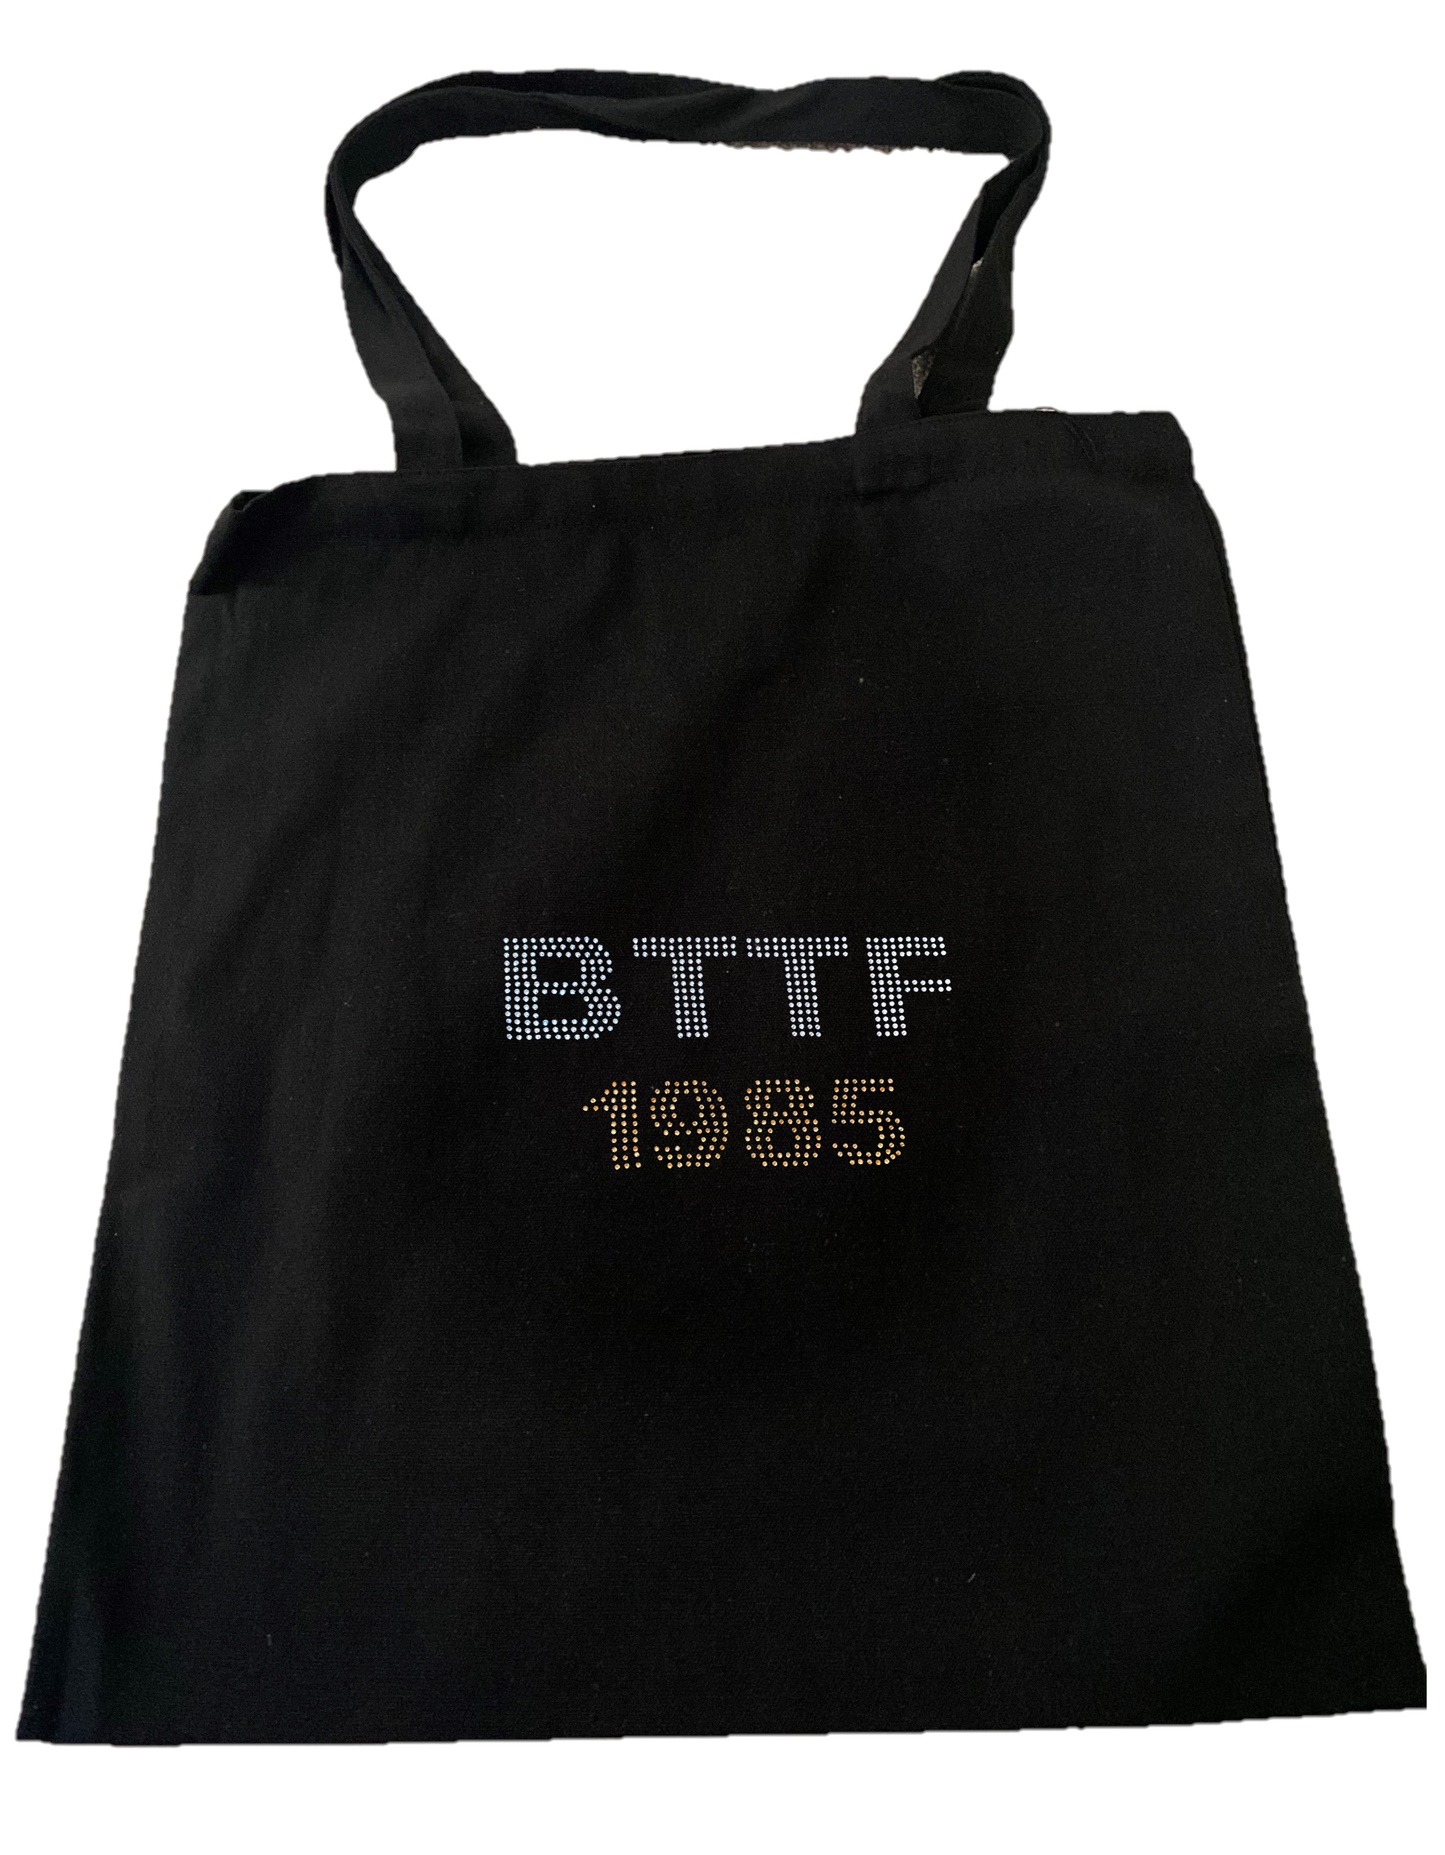 Back to the Future Tote Bag